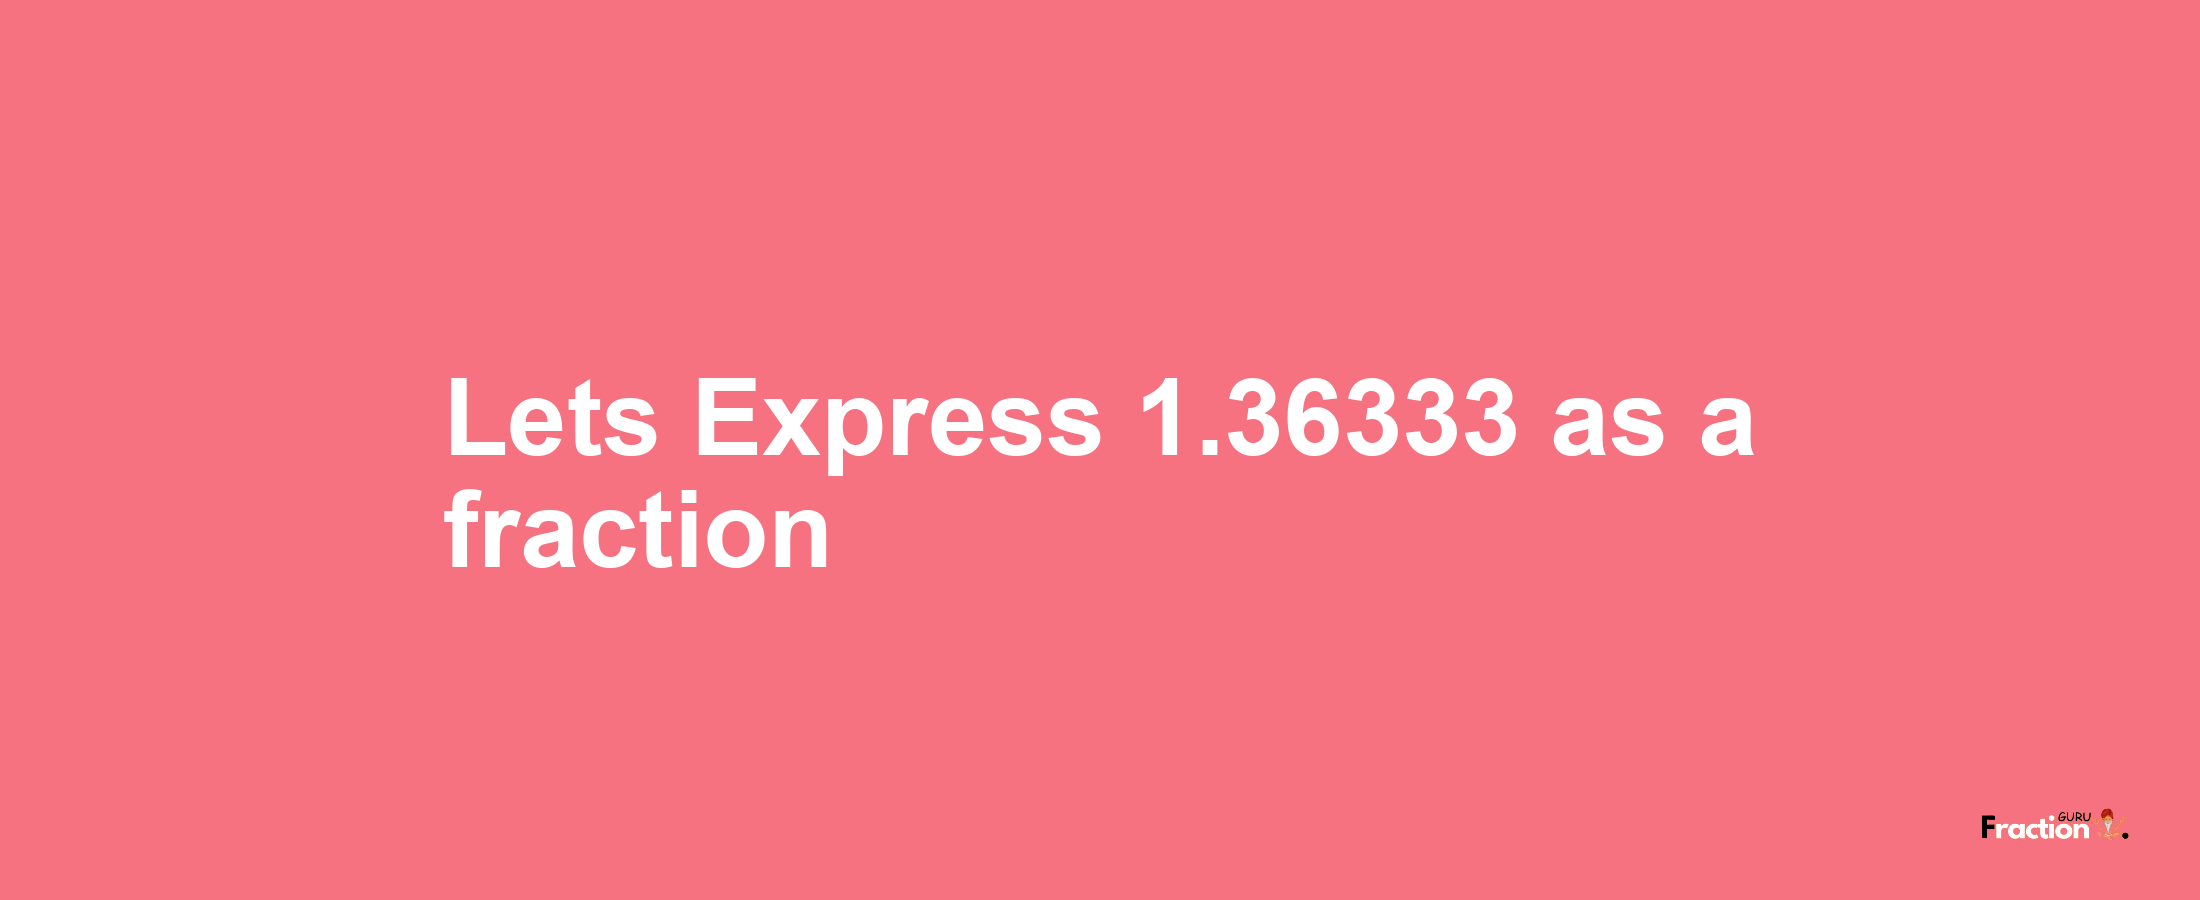 Lets Express 1.36333 as afraction